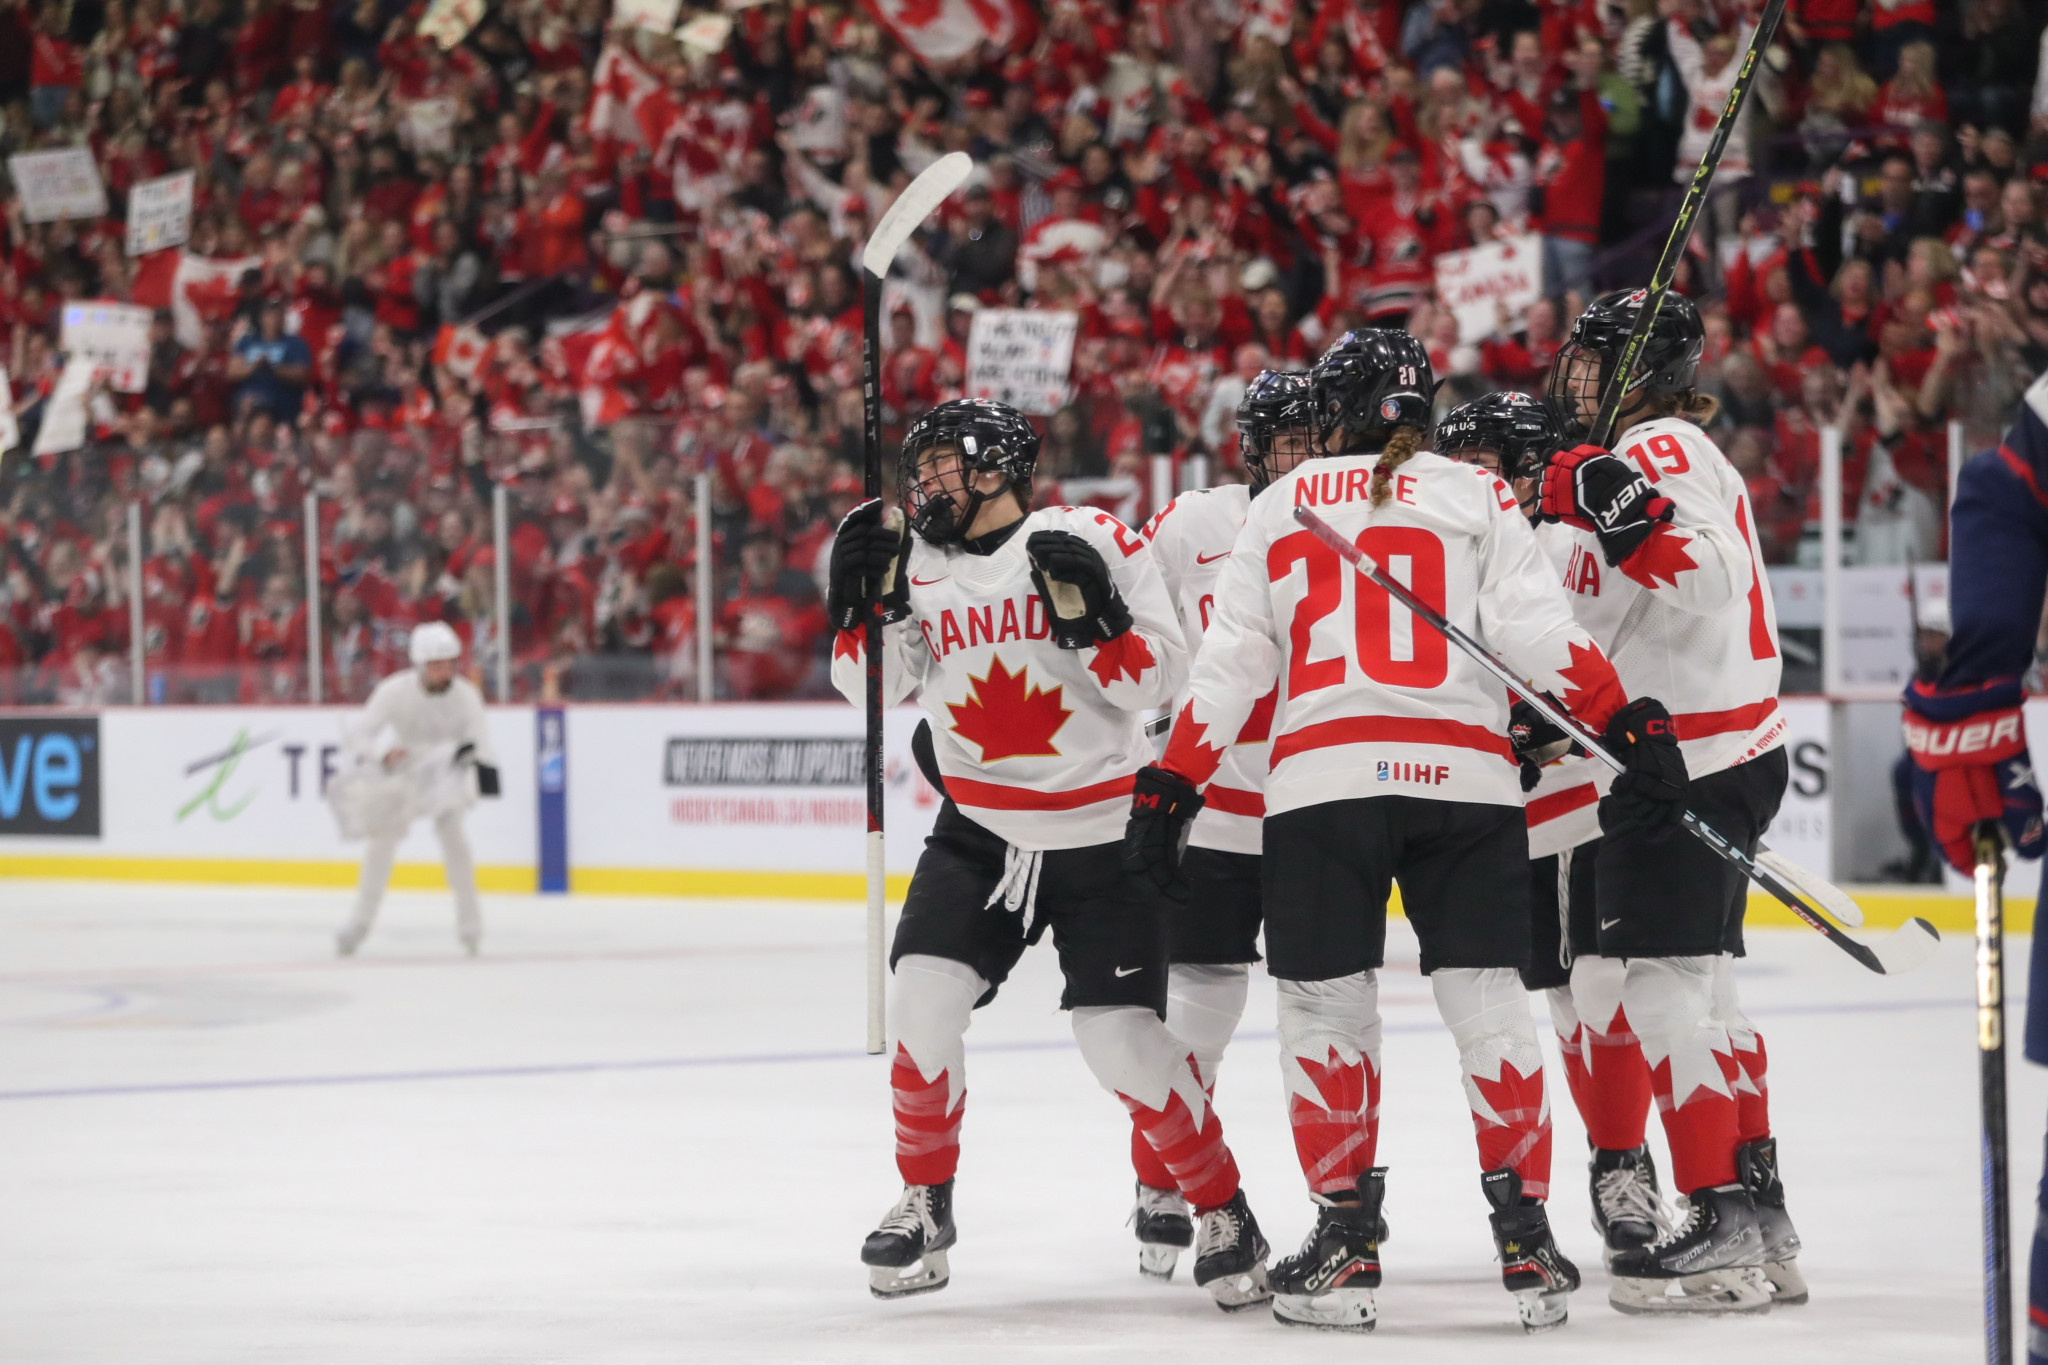 Hockey Canada has regained funding from the country's Government after meeting conditions ©Getty Images